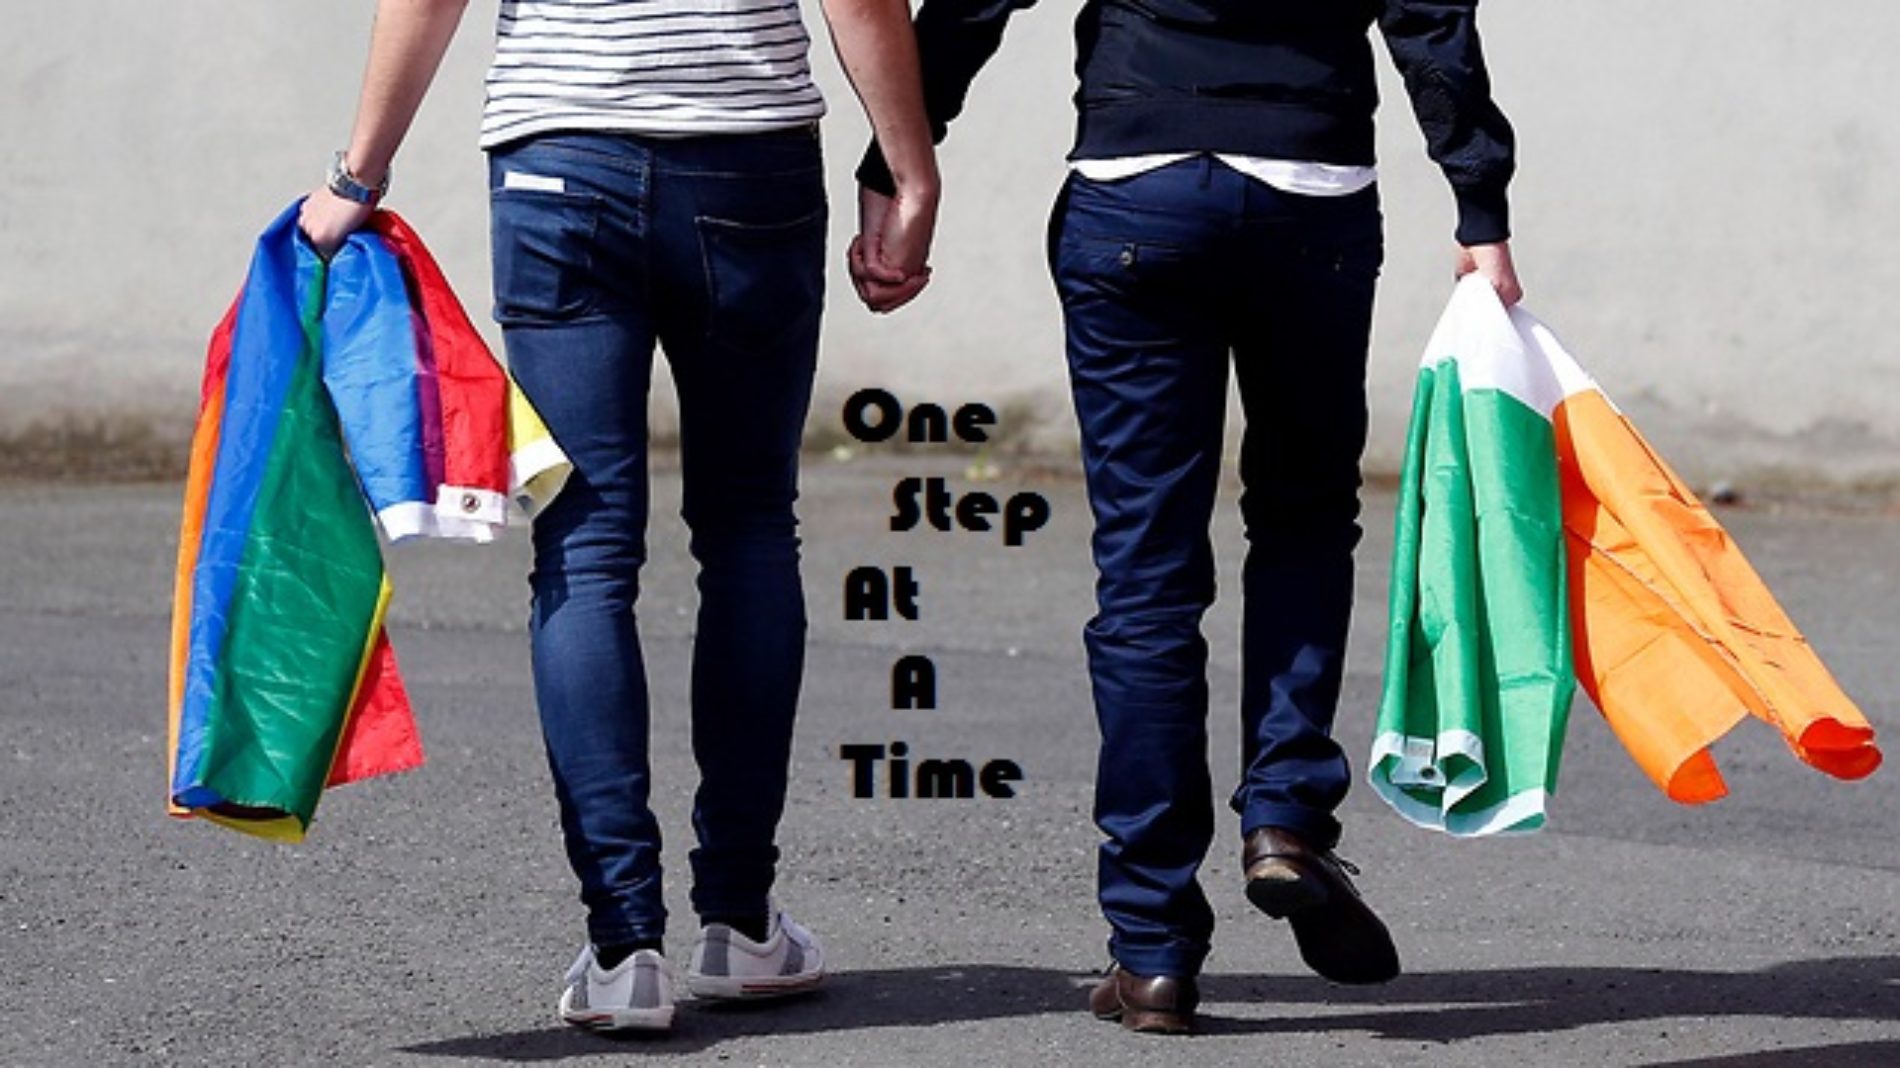 ONE STEP AT A TIME: By Melvyn & Carl